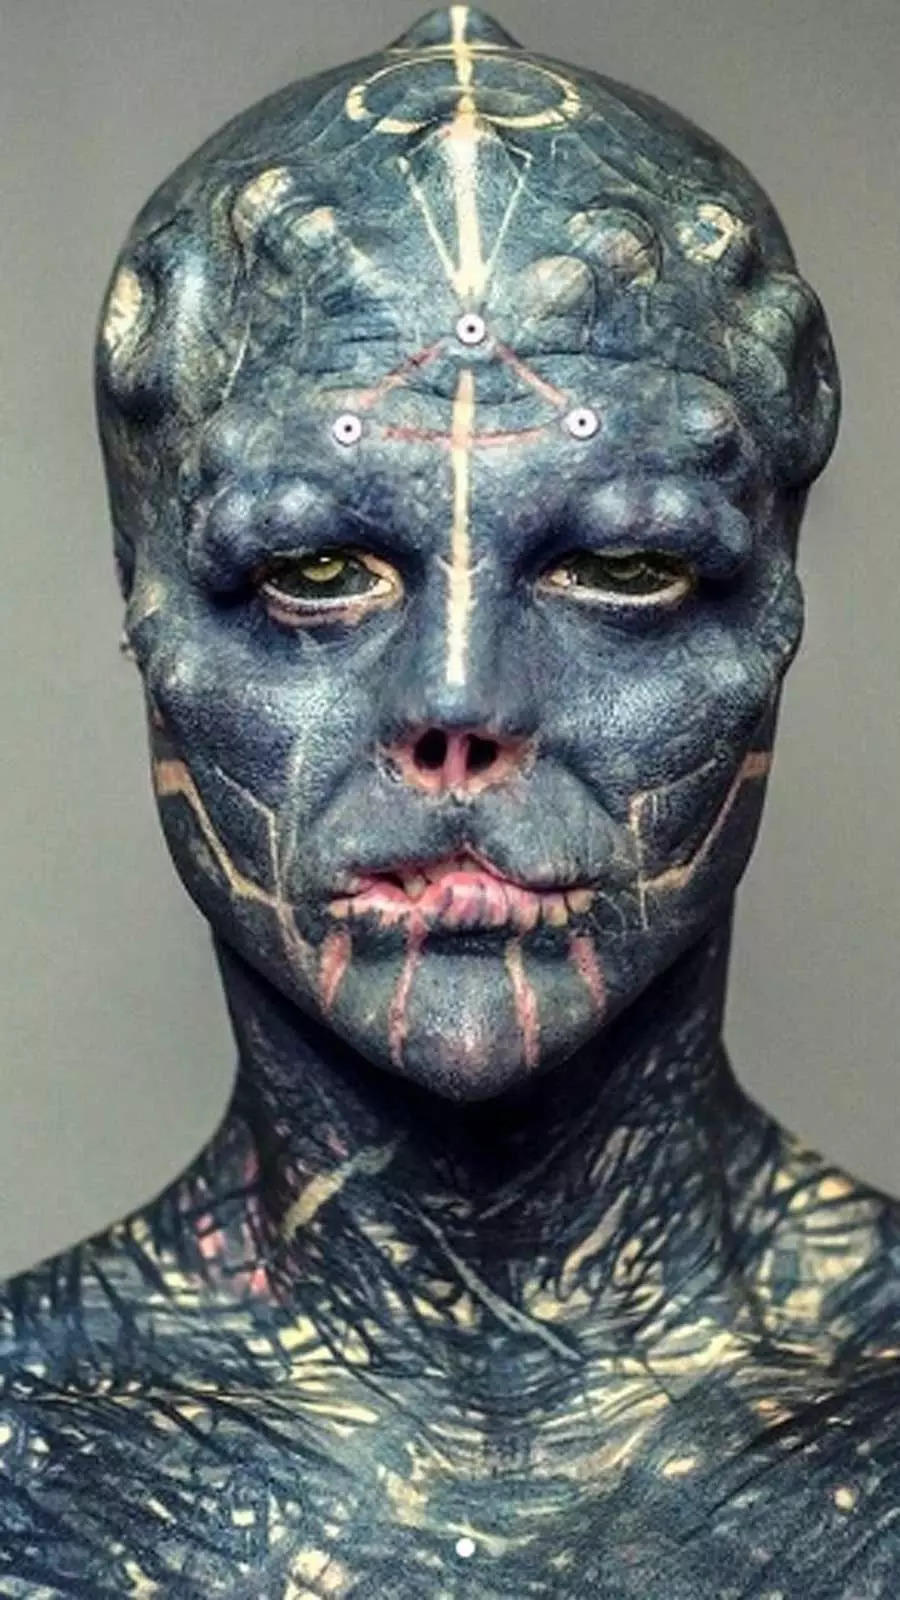 Extreme tattoos & body modifications could get you in serious trouble. Ask this guy